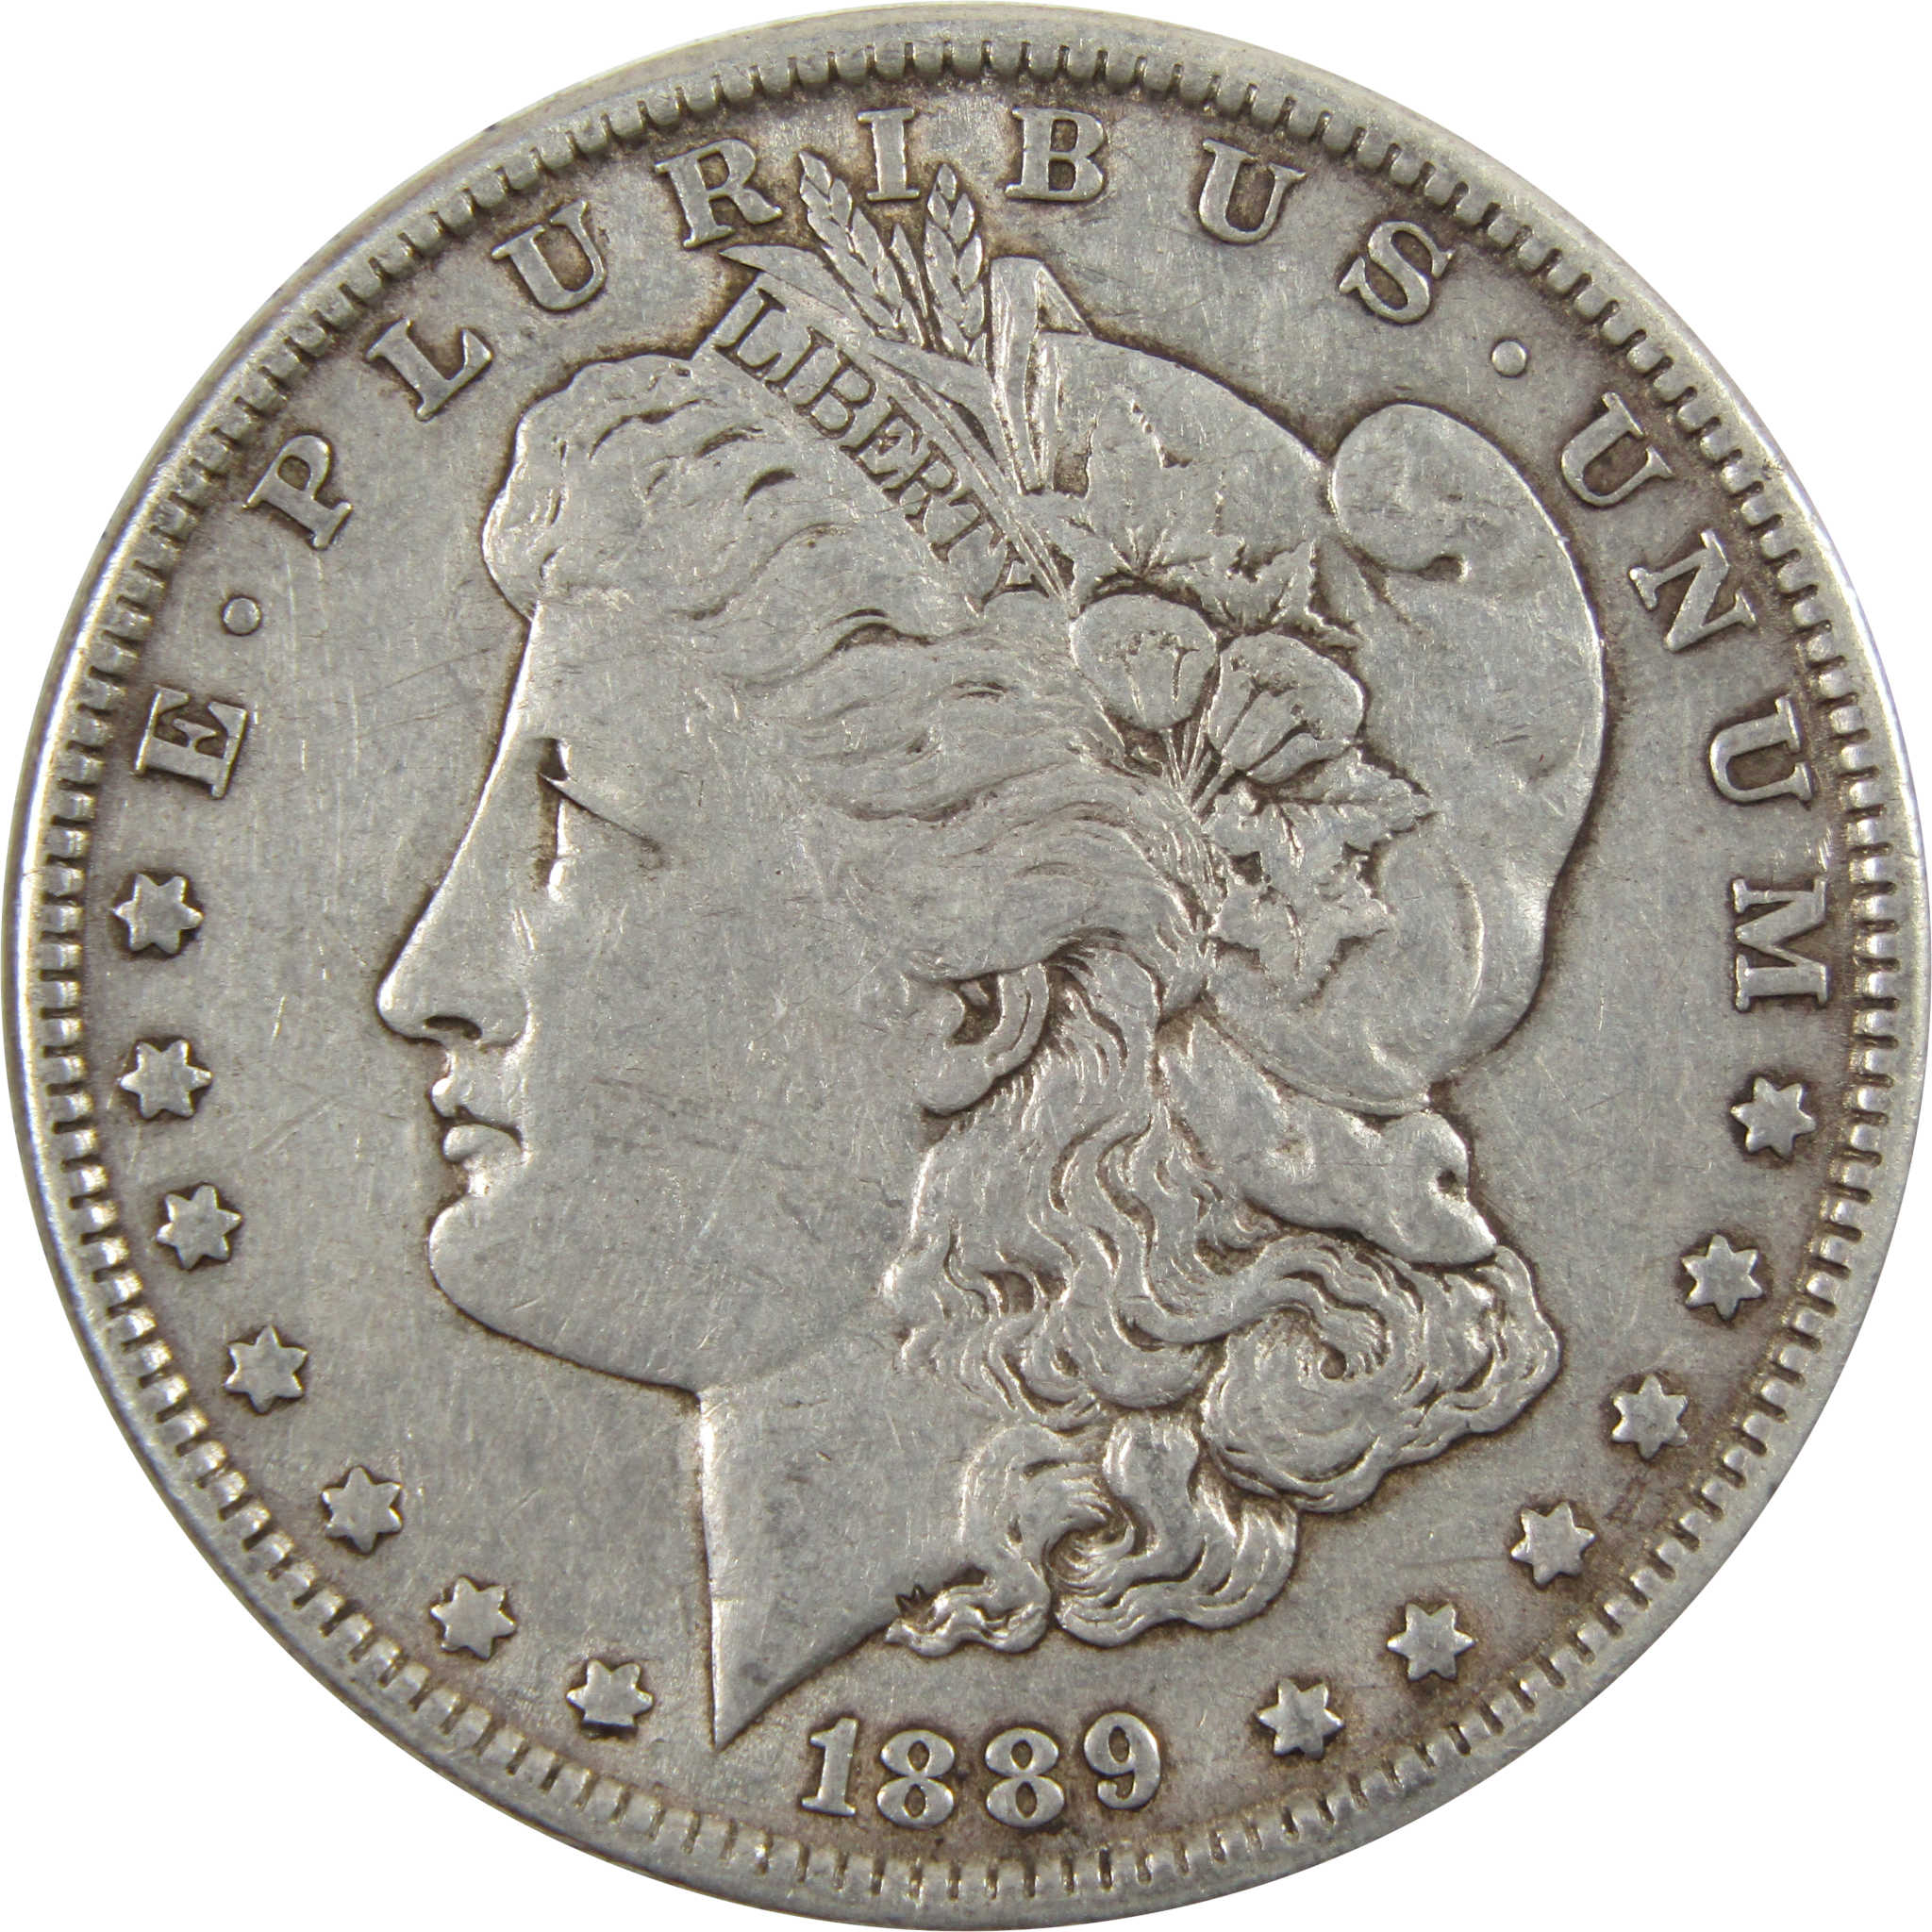 1889 Barwing Morgan Dollar XF EF Extremely Fine 90% Silver SKU:I5127 - Morgan coin - Morgan silver dollar - Morgan silver dollar for sale - Profile Coins &amp; Collectibles